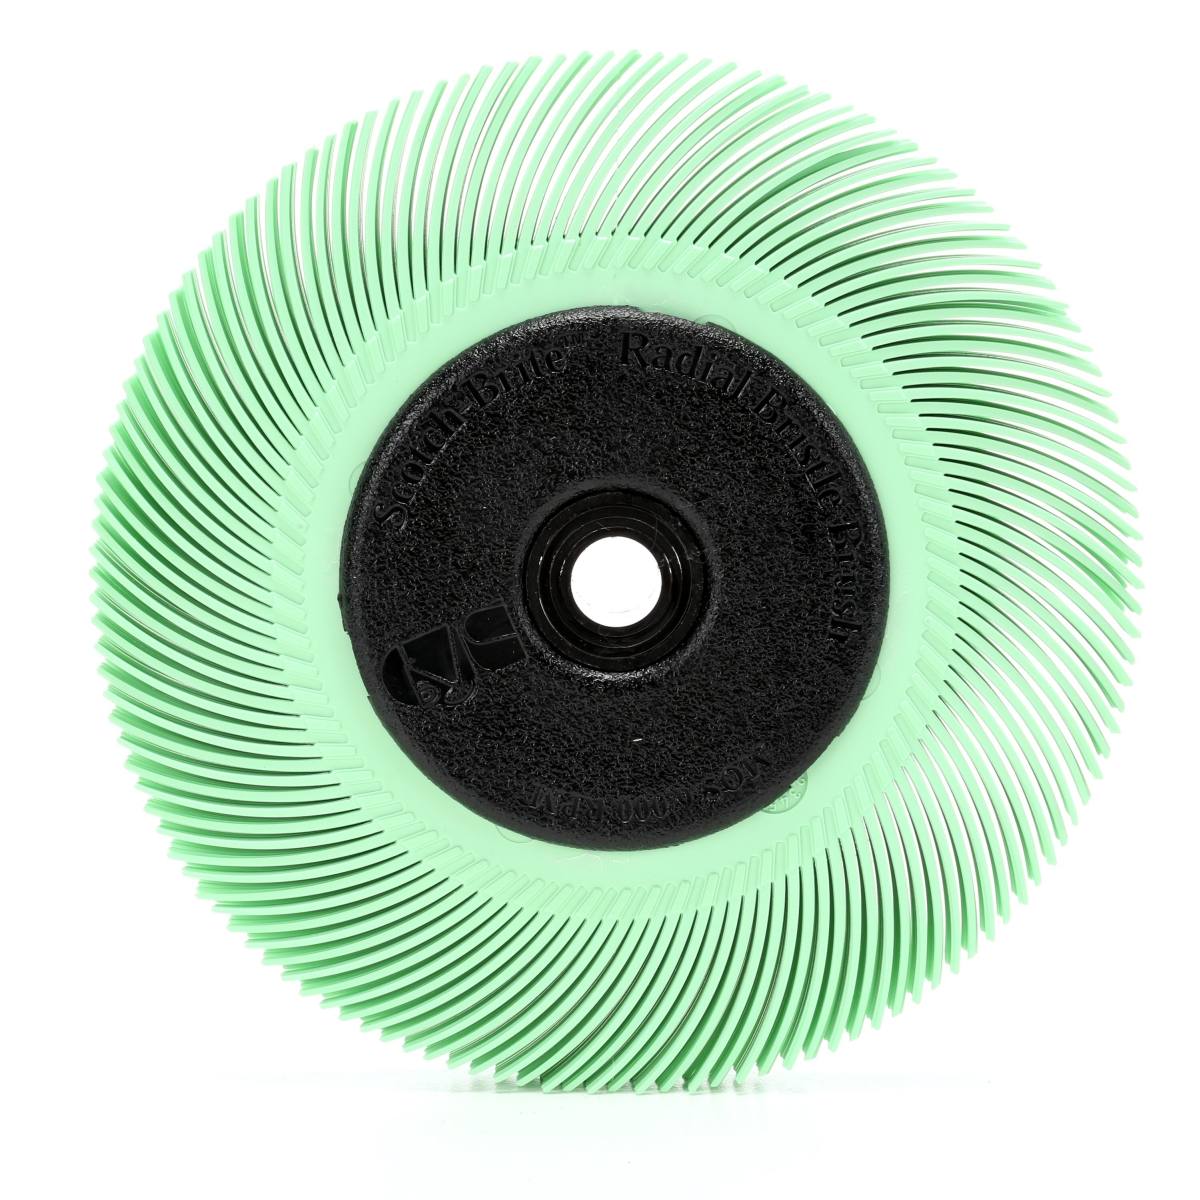 3M Scotch-Brite Radial Bristle Disc BB-ZB with flange, green, 152.4 mm, 1 micron, type C #33217 (60200)